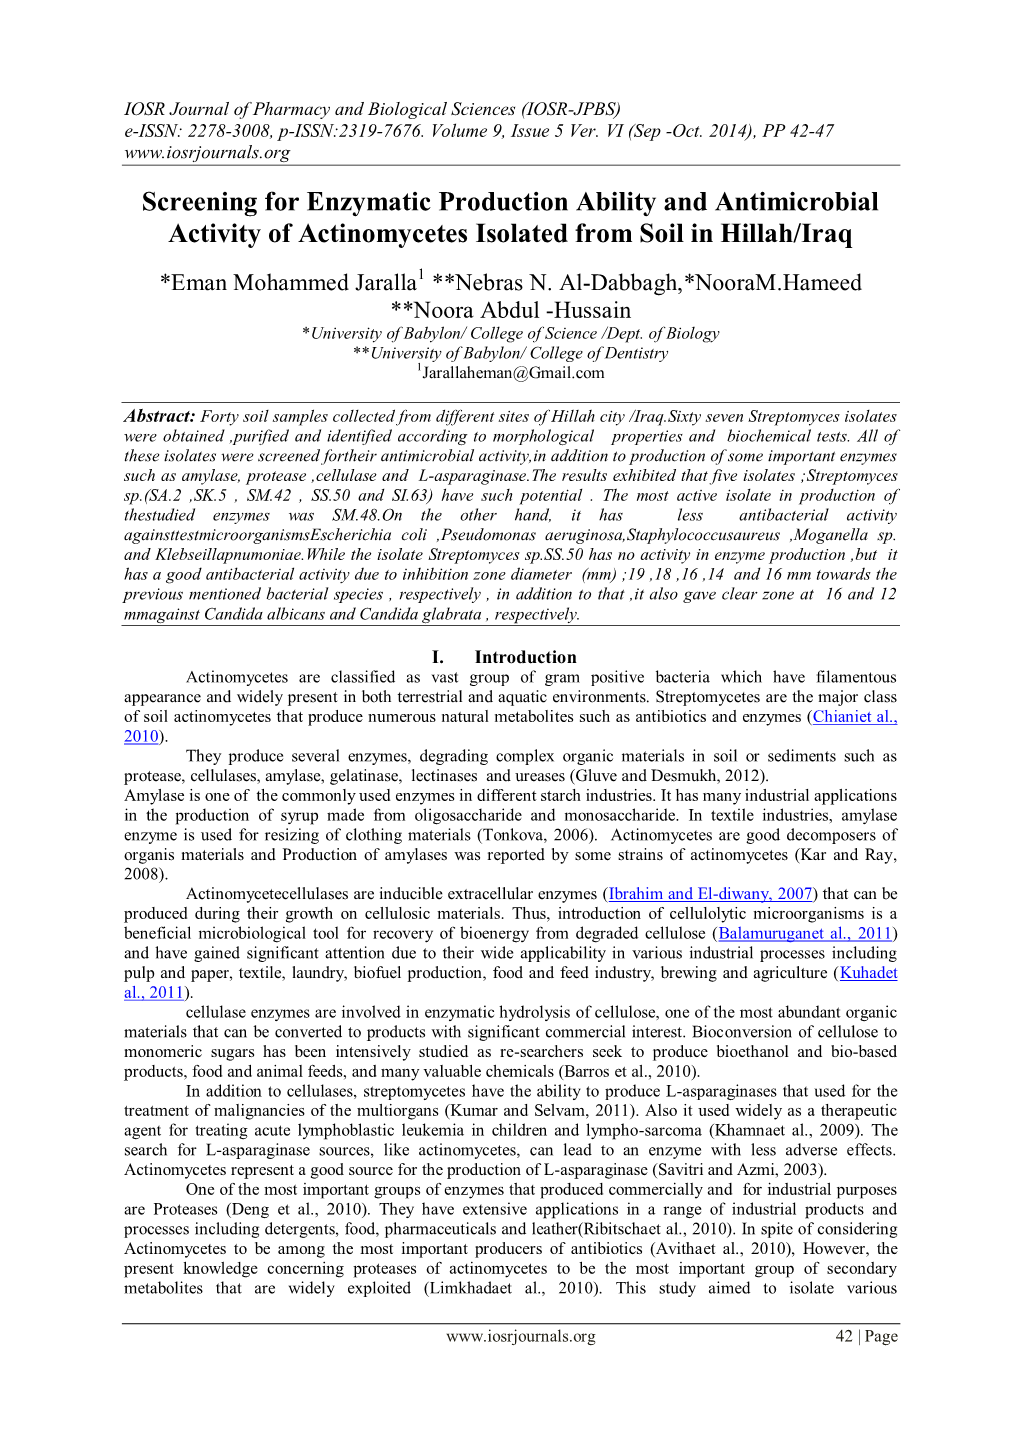 Screening for Enzymatic Production Ability and Antimicrobial Activity of Actinomycetes Isolated from Soil in Hillah/Iraq